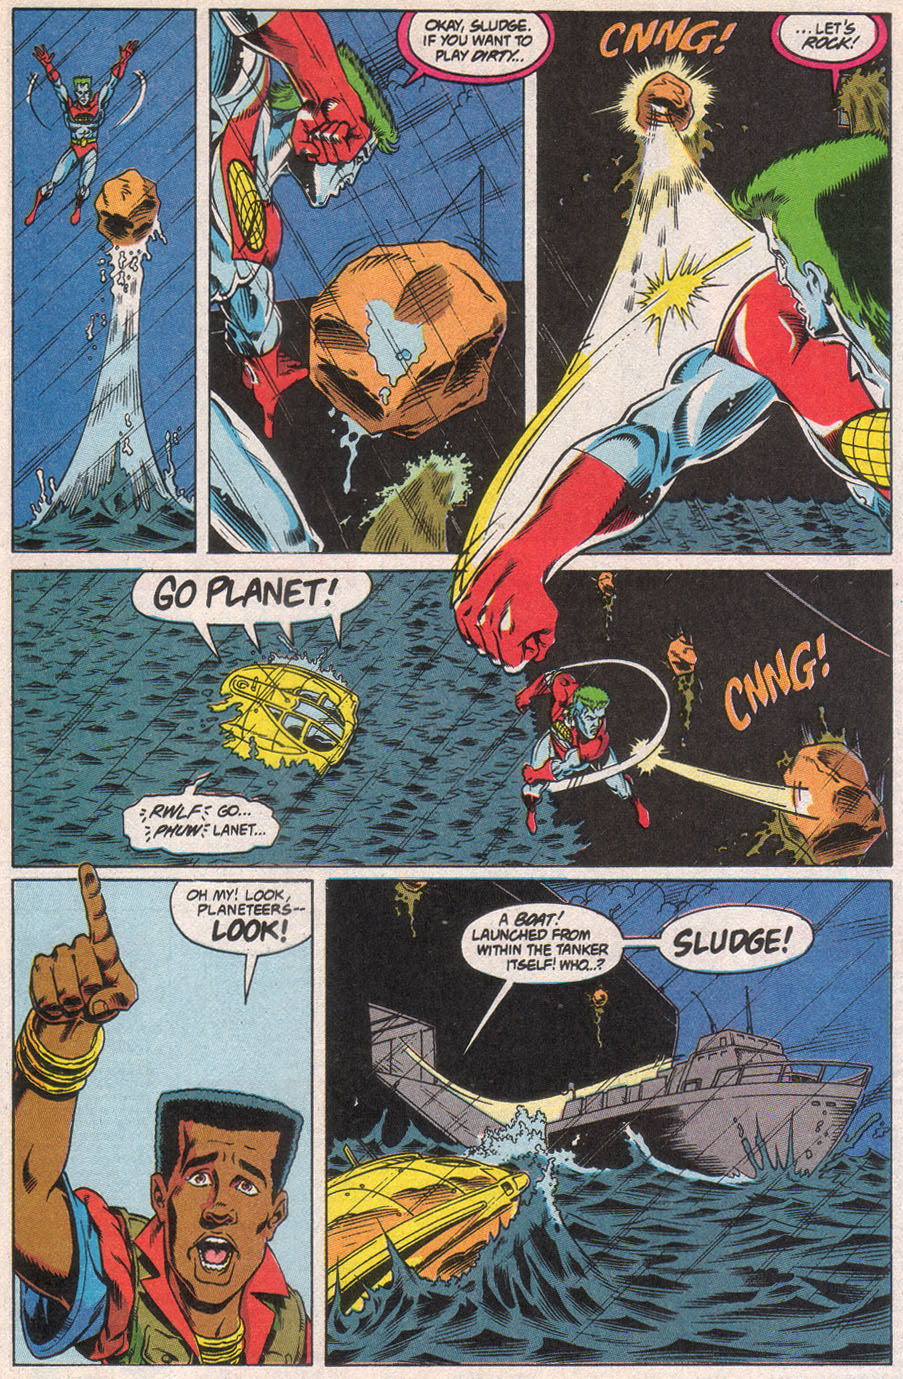 Captain Planet and the Planeteers 9 Page 10